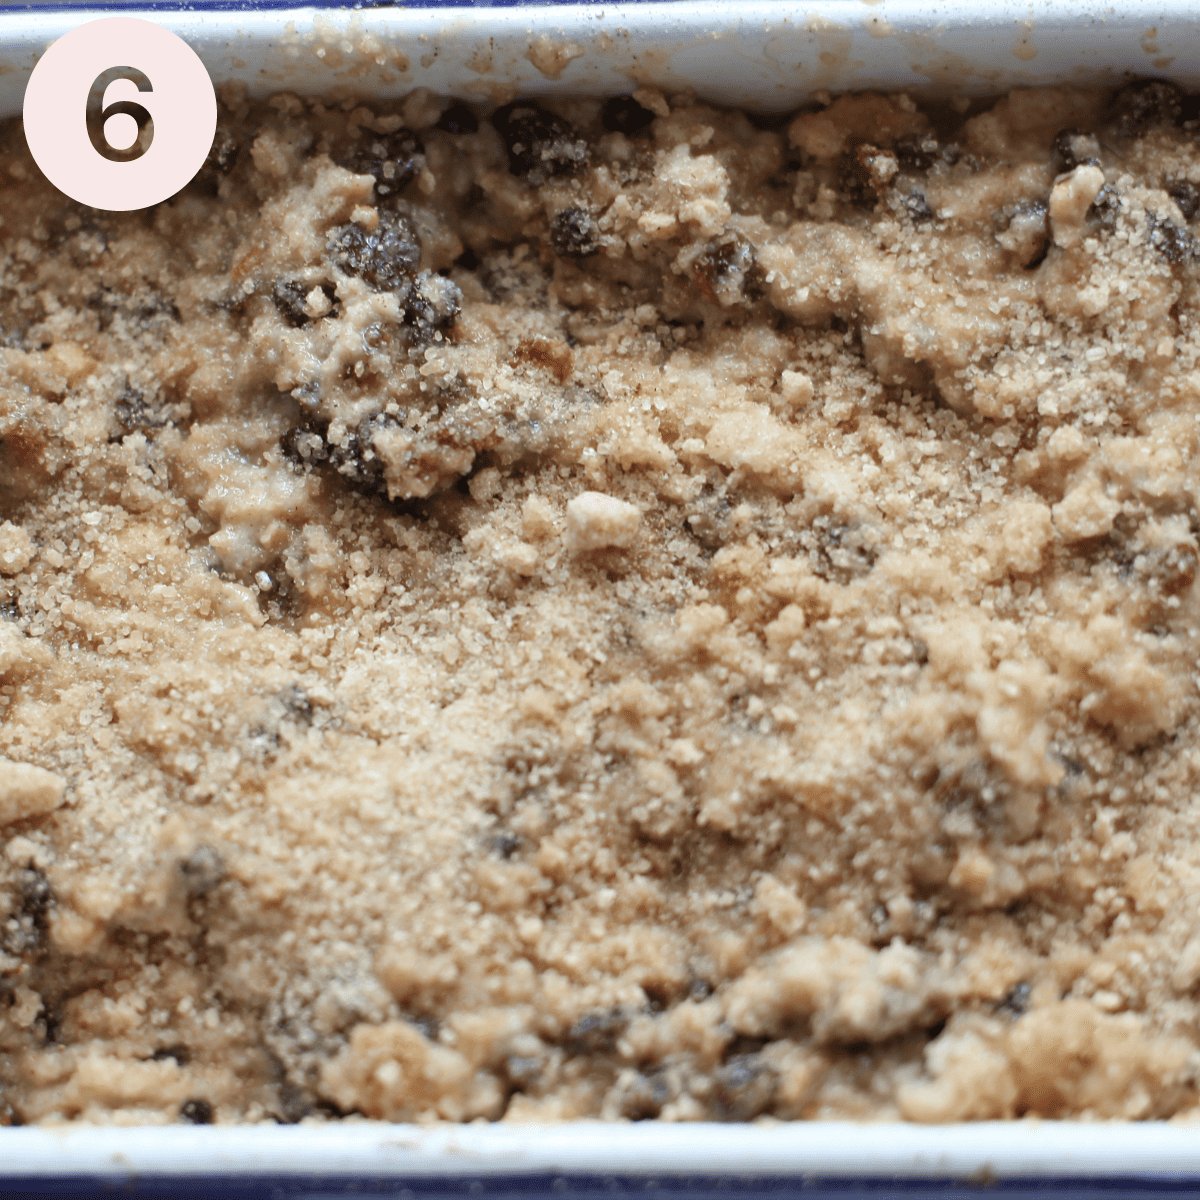 Sprinkling brown sugar on the top of the mixture.